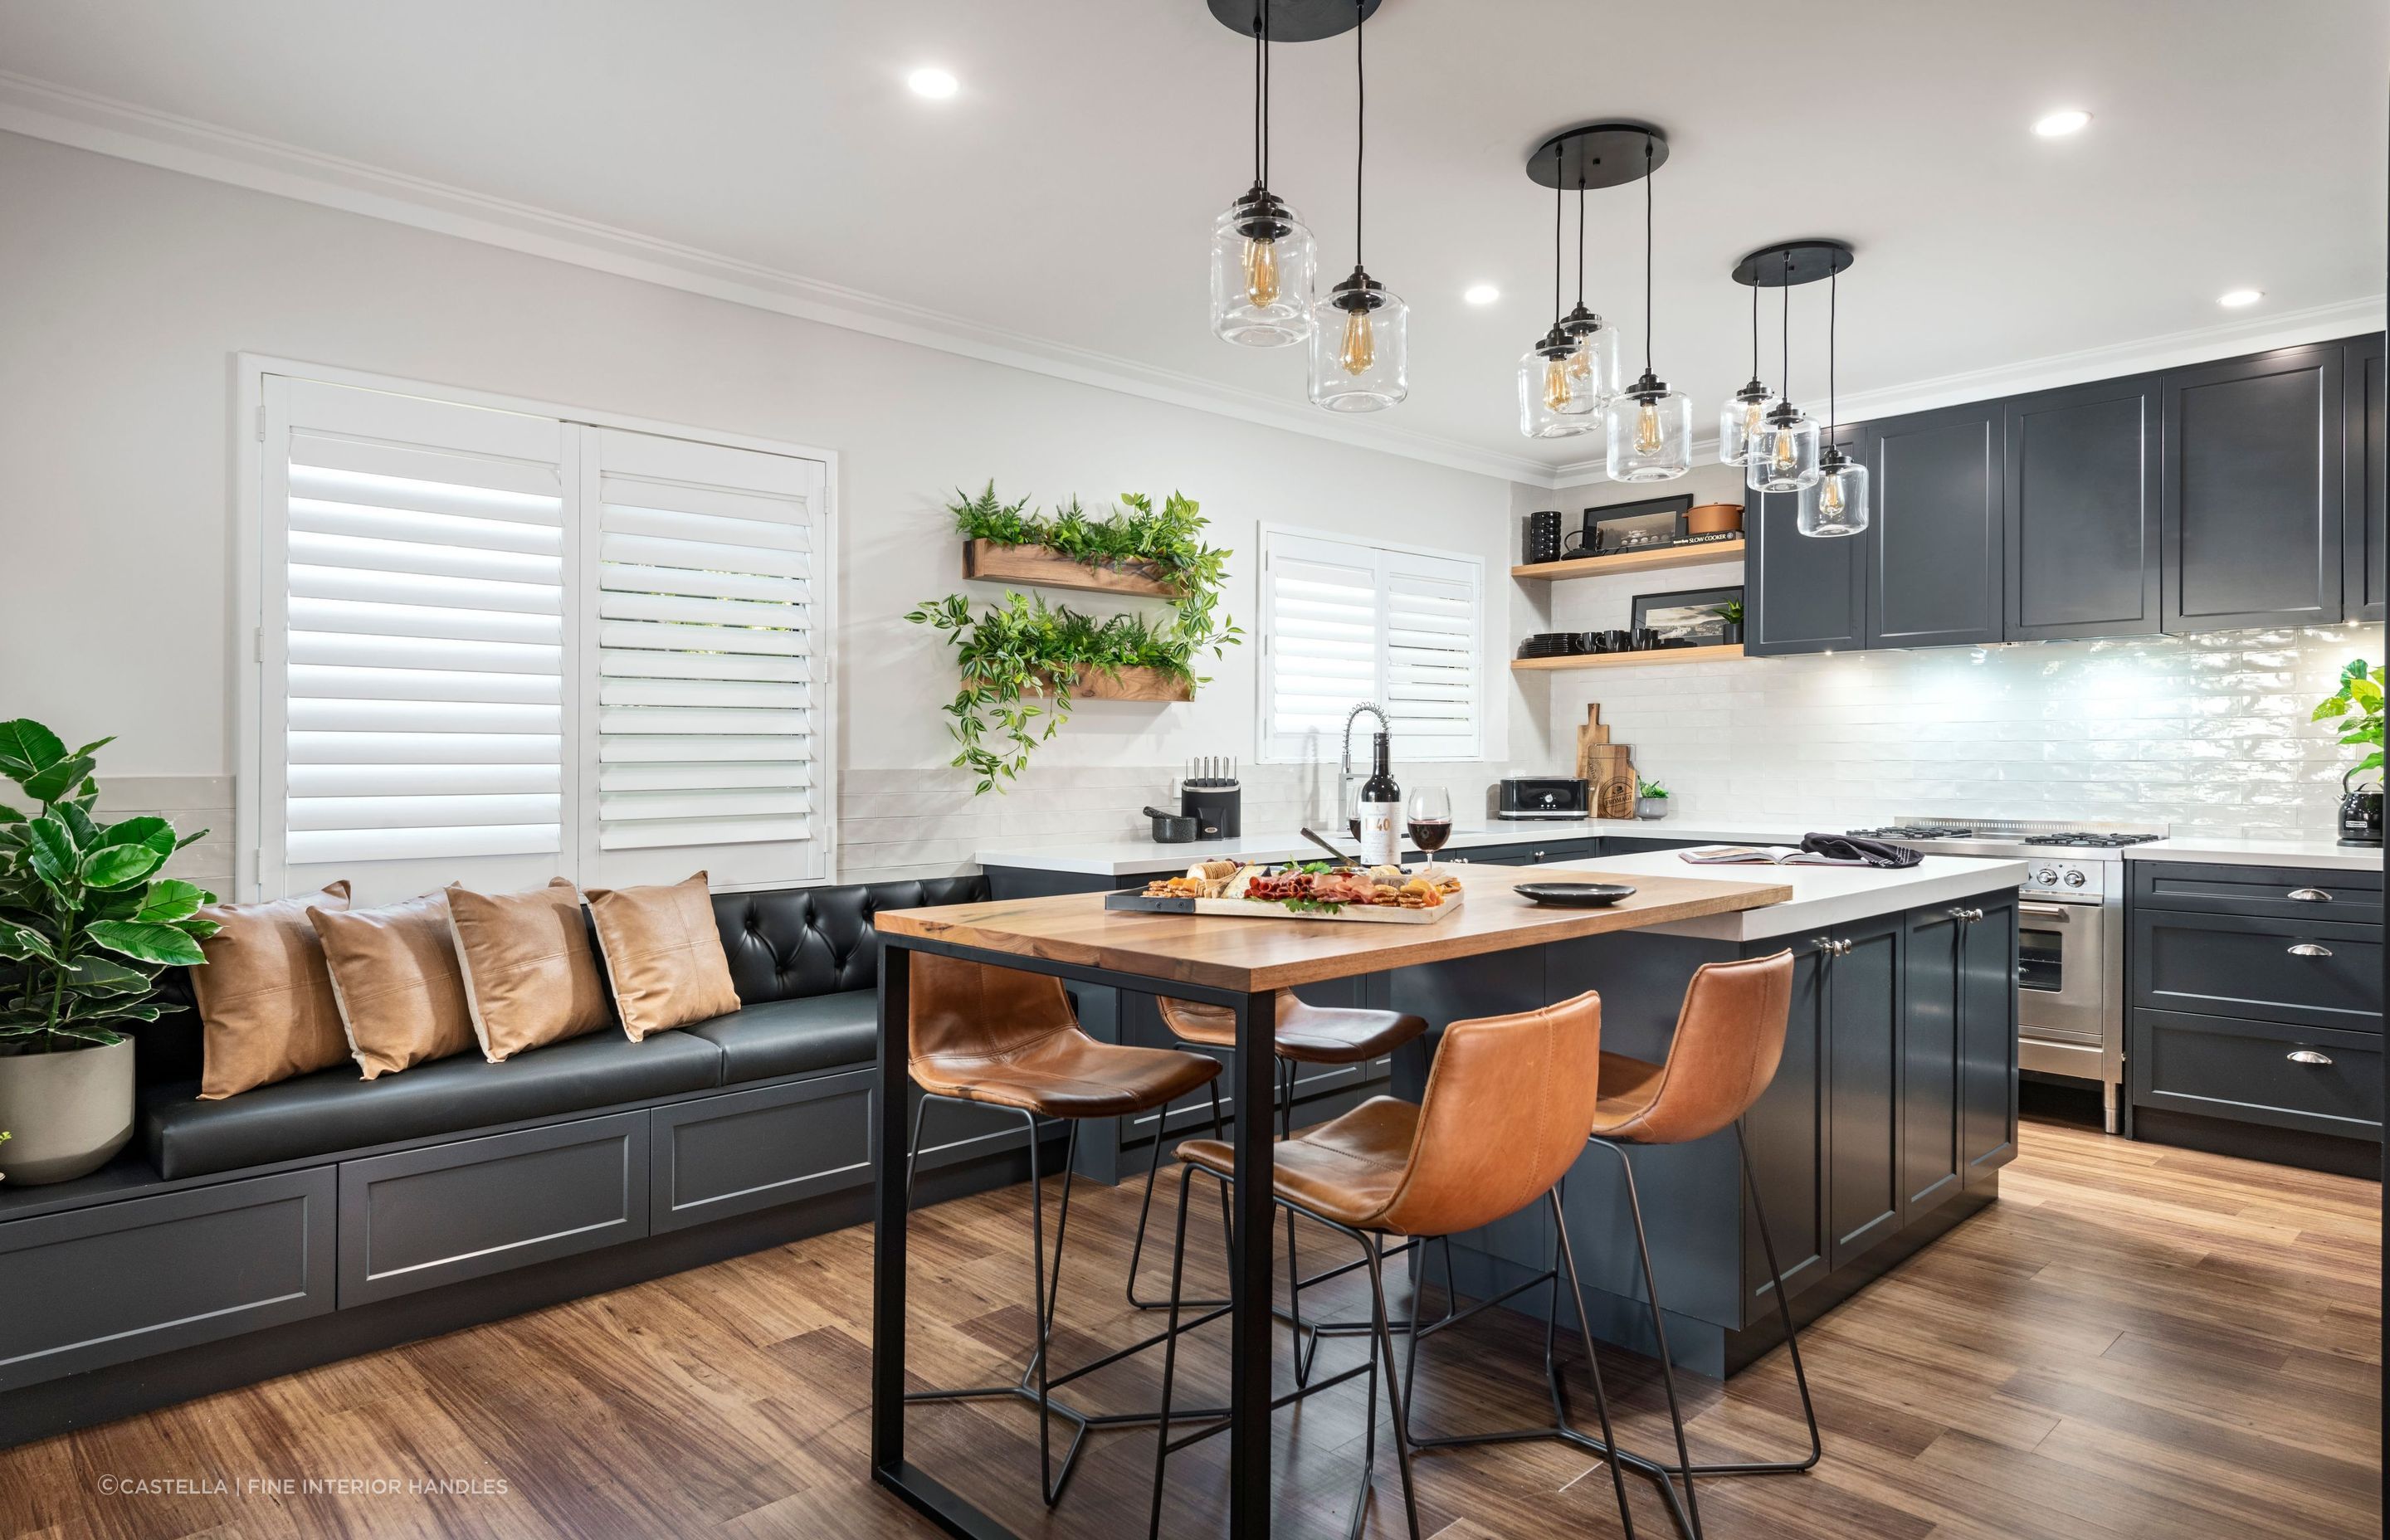 This Carmen Hansberry Design kitchen showcases the very best in decor ideas from lighting and colour schemes to furnishings and finishes